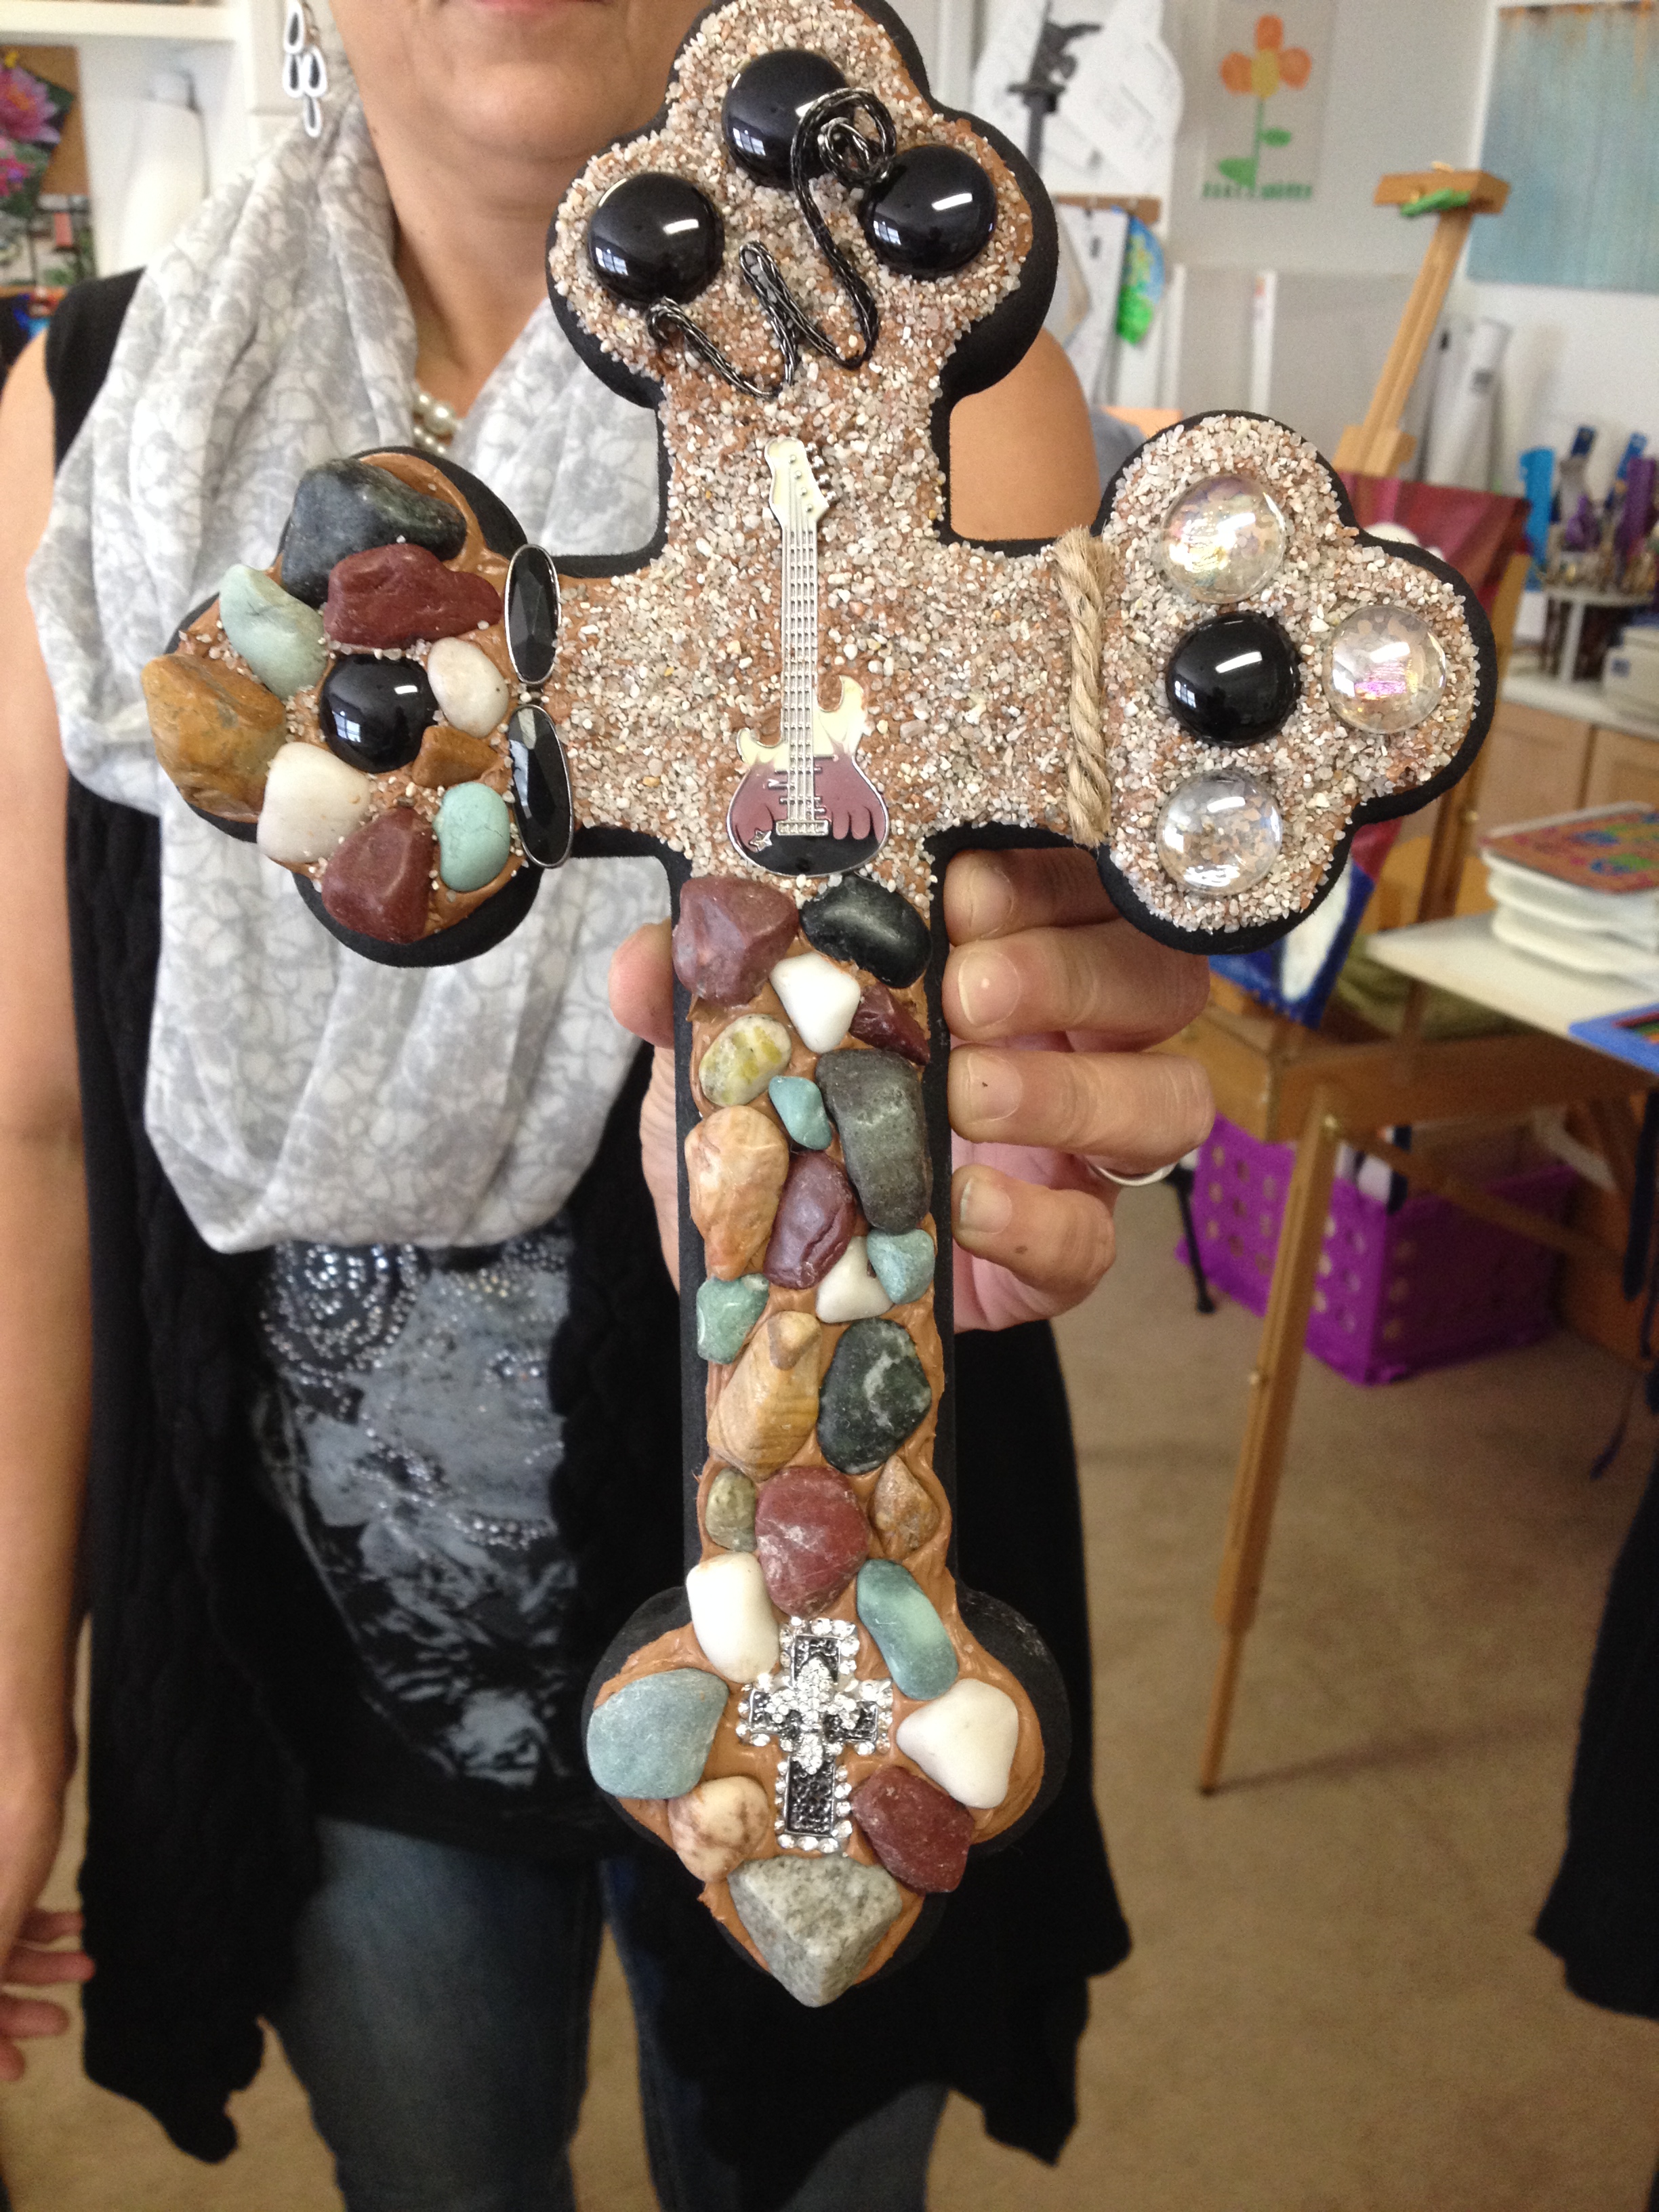 All kinds of creativity going on here!  What a way to honor her father with a cross!